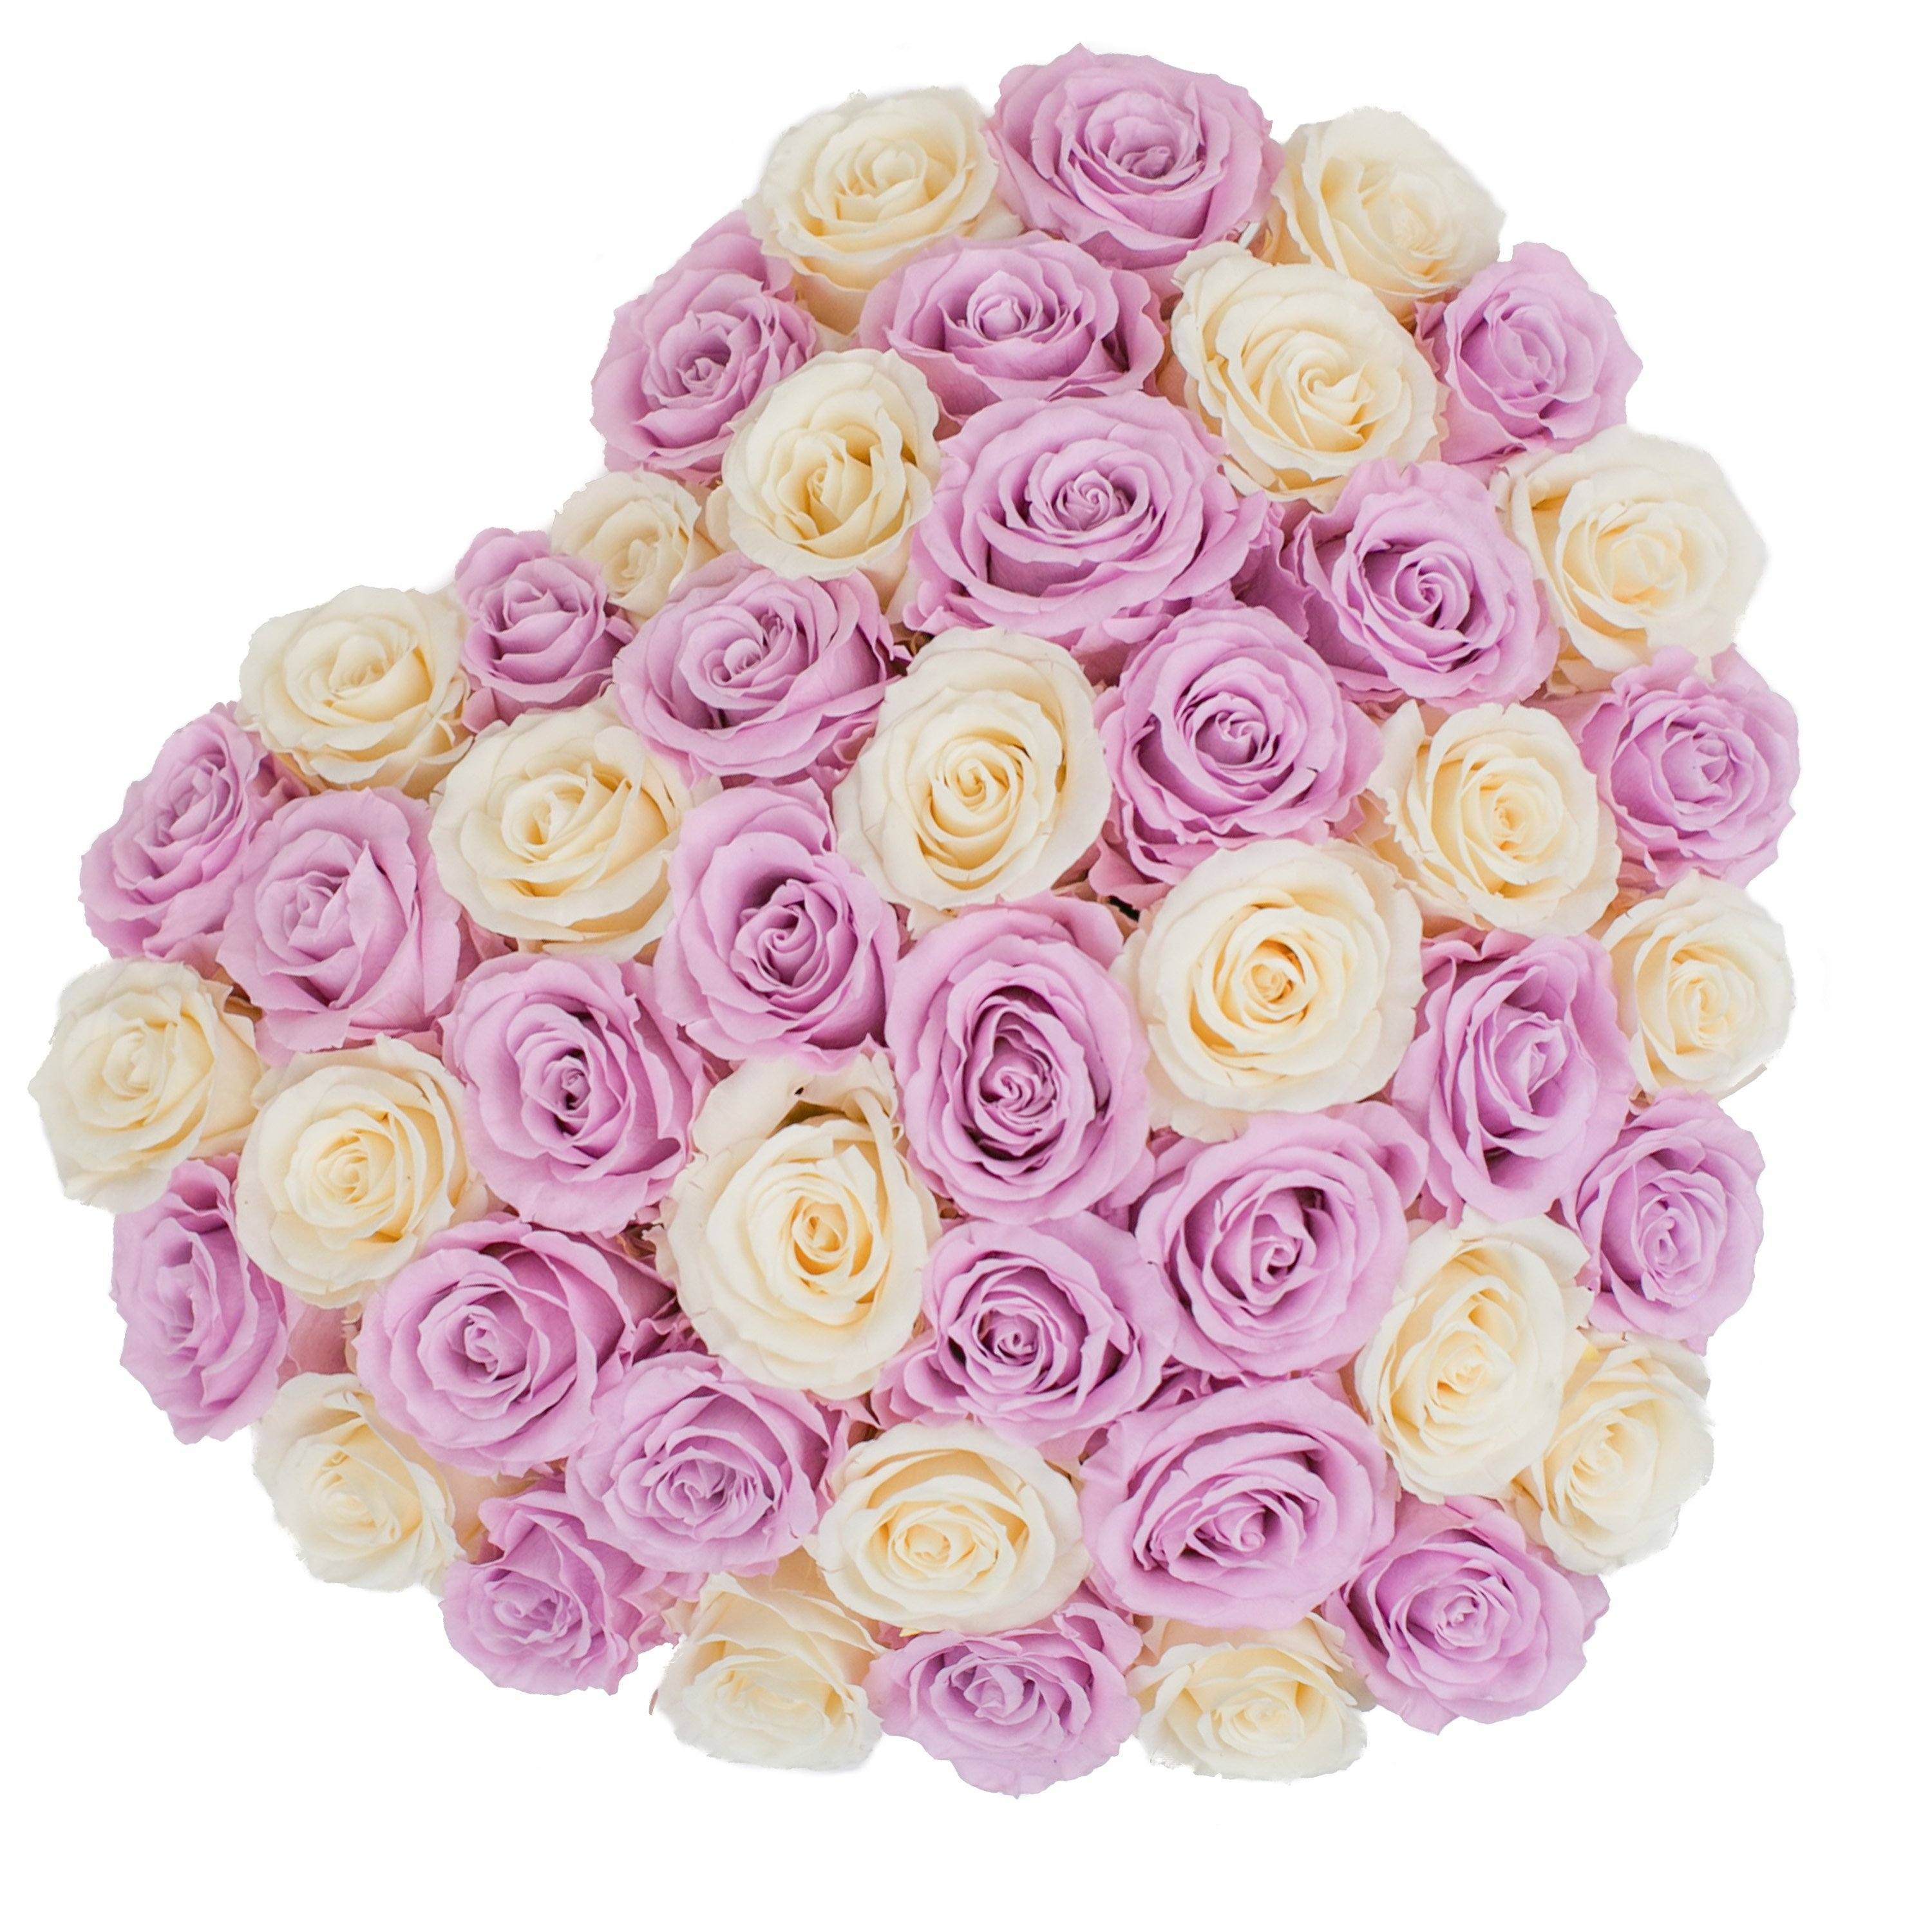 the million LOVE+ - glamour light-pink suede box - light-pink/ivory ETERNITY roses pink eternity roses - the million roses